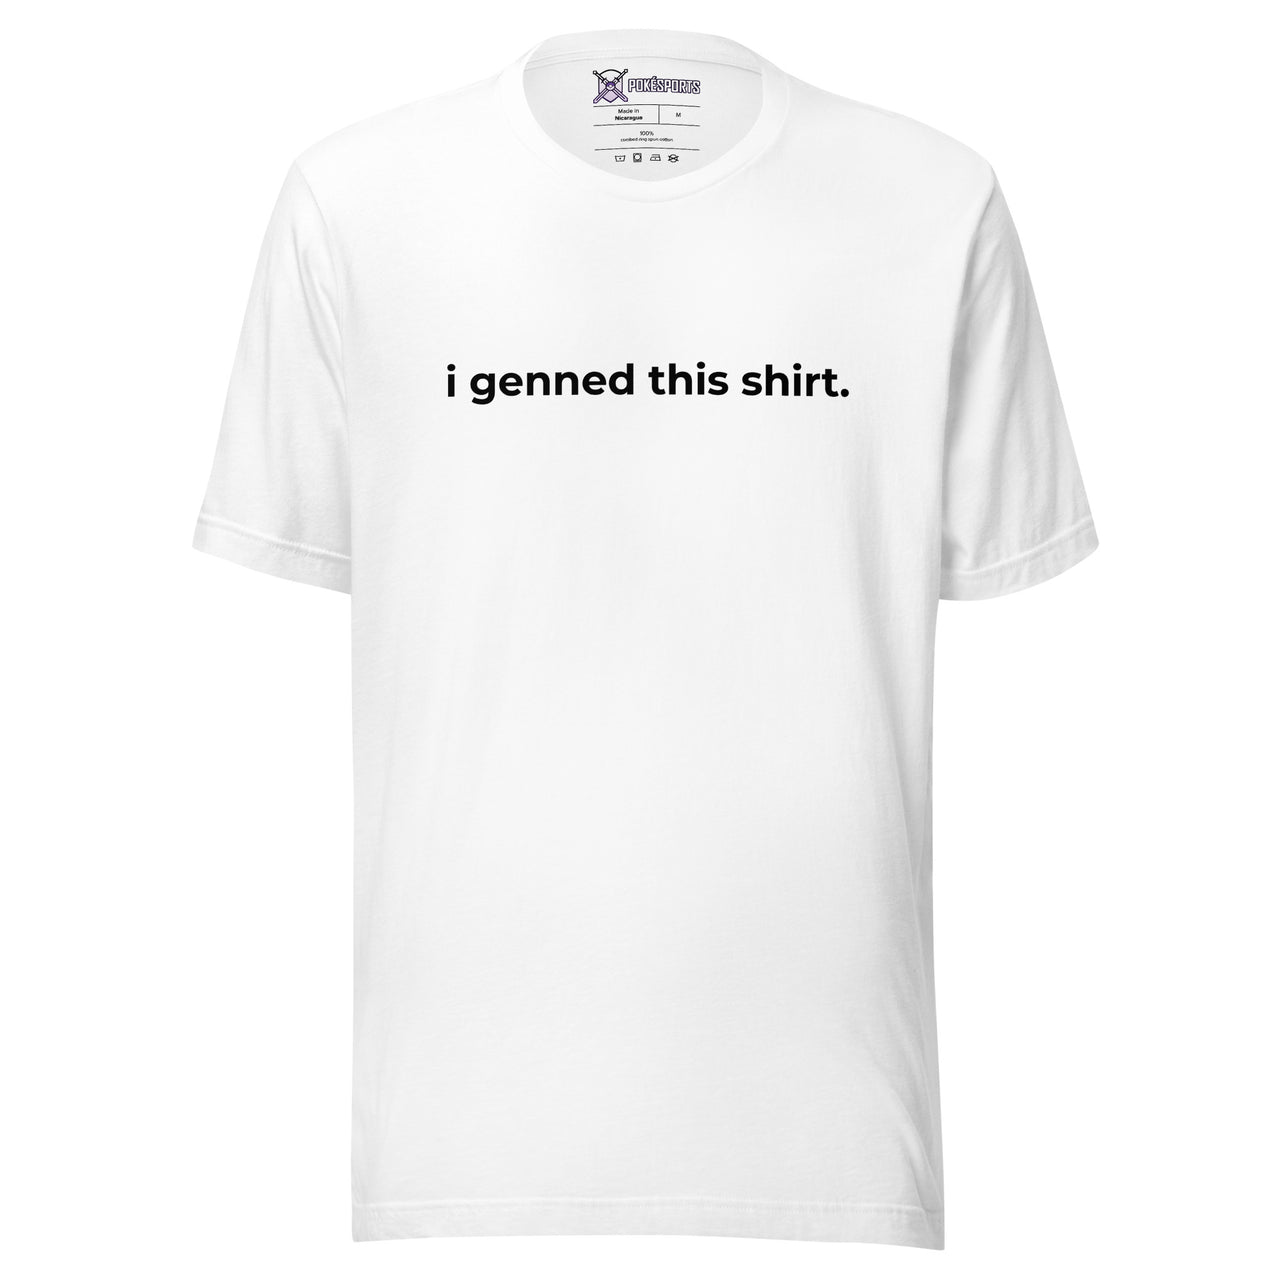 i genned this shirt (dark text)